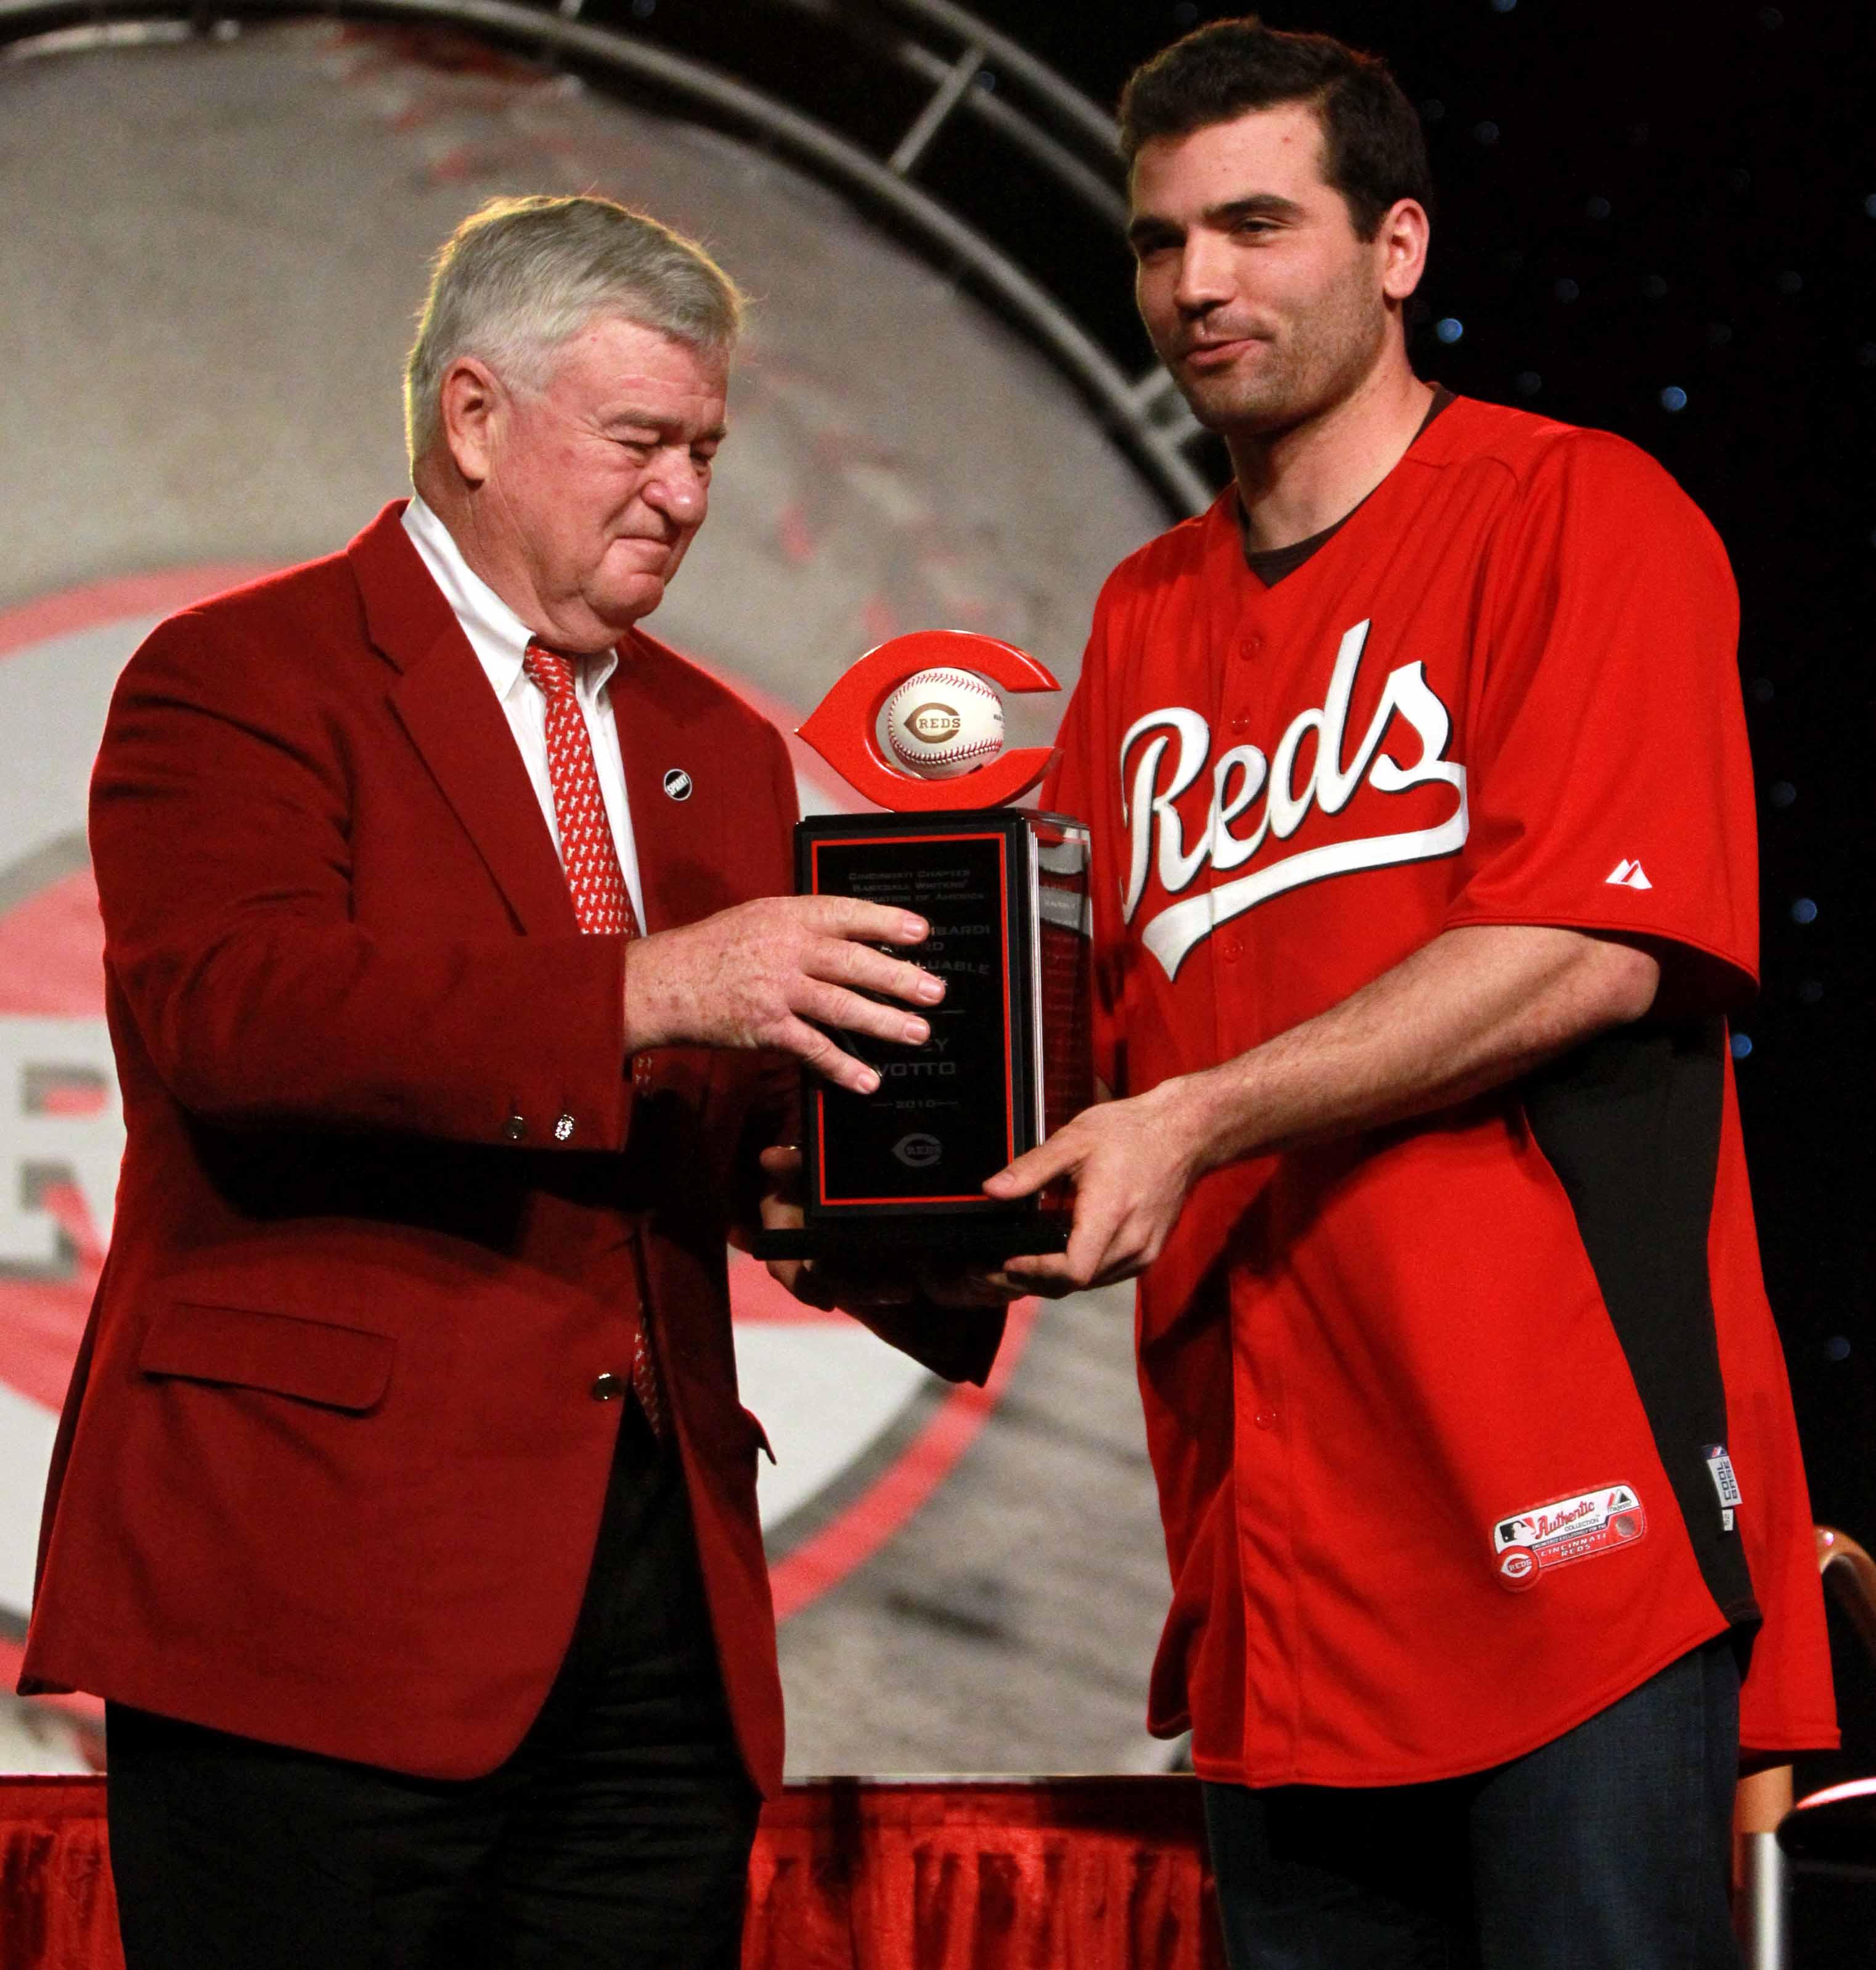 DECEMBER 4, 2010: Reds owner Bob Castellini hands the MVP (the Ernie Lombardi Most Valuable Player award) award to Joey Votto during RedsFest at Duke Energy Convention Center.